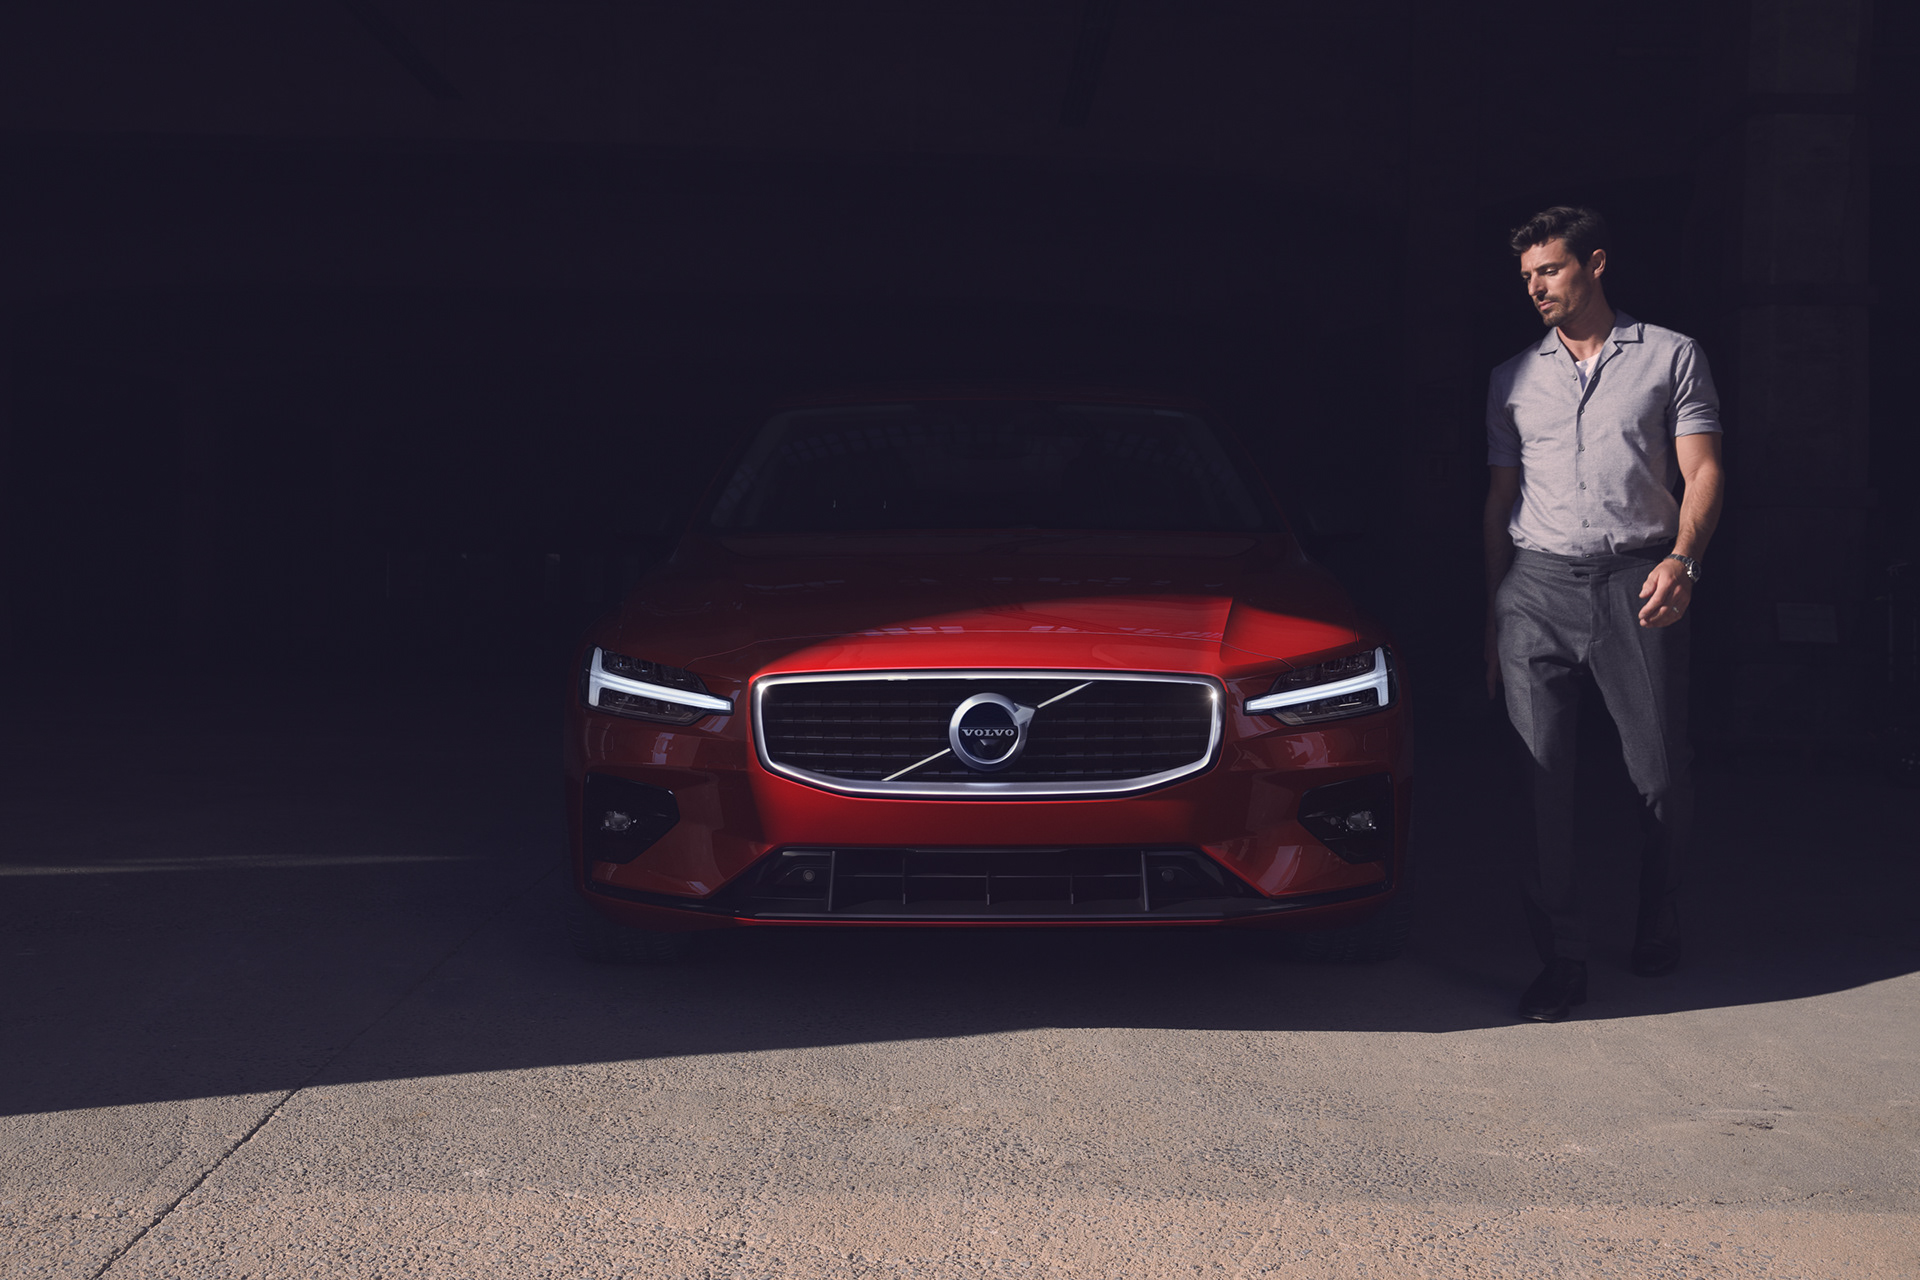 Car Photography: Photographing the new Volvo S60